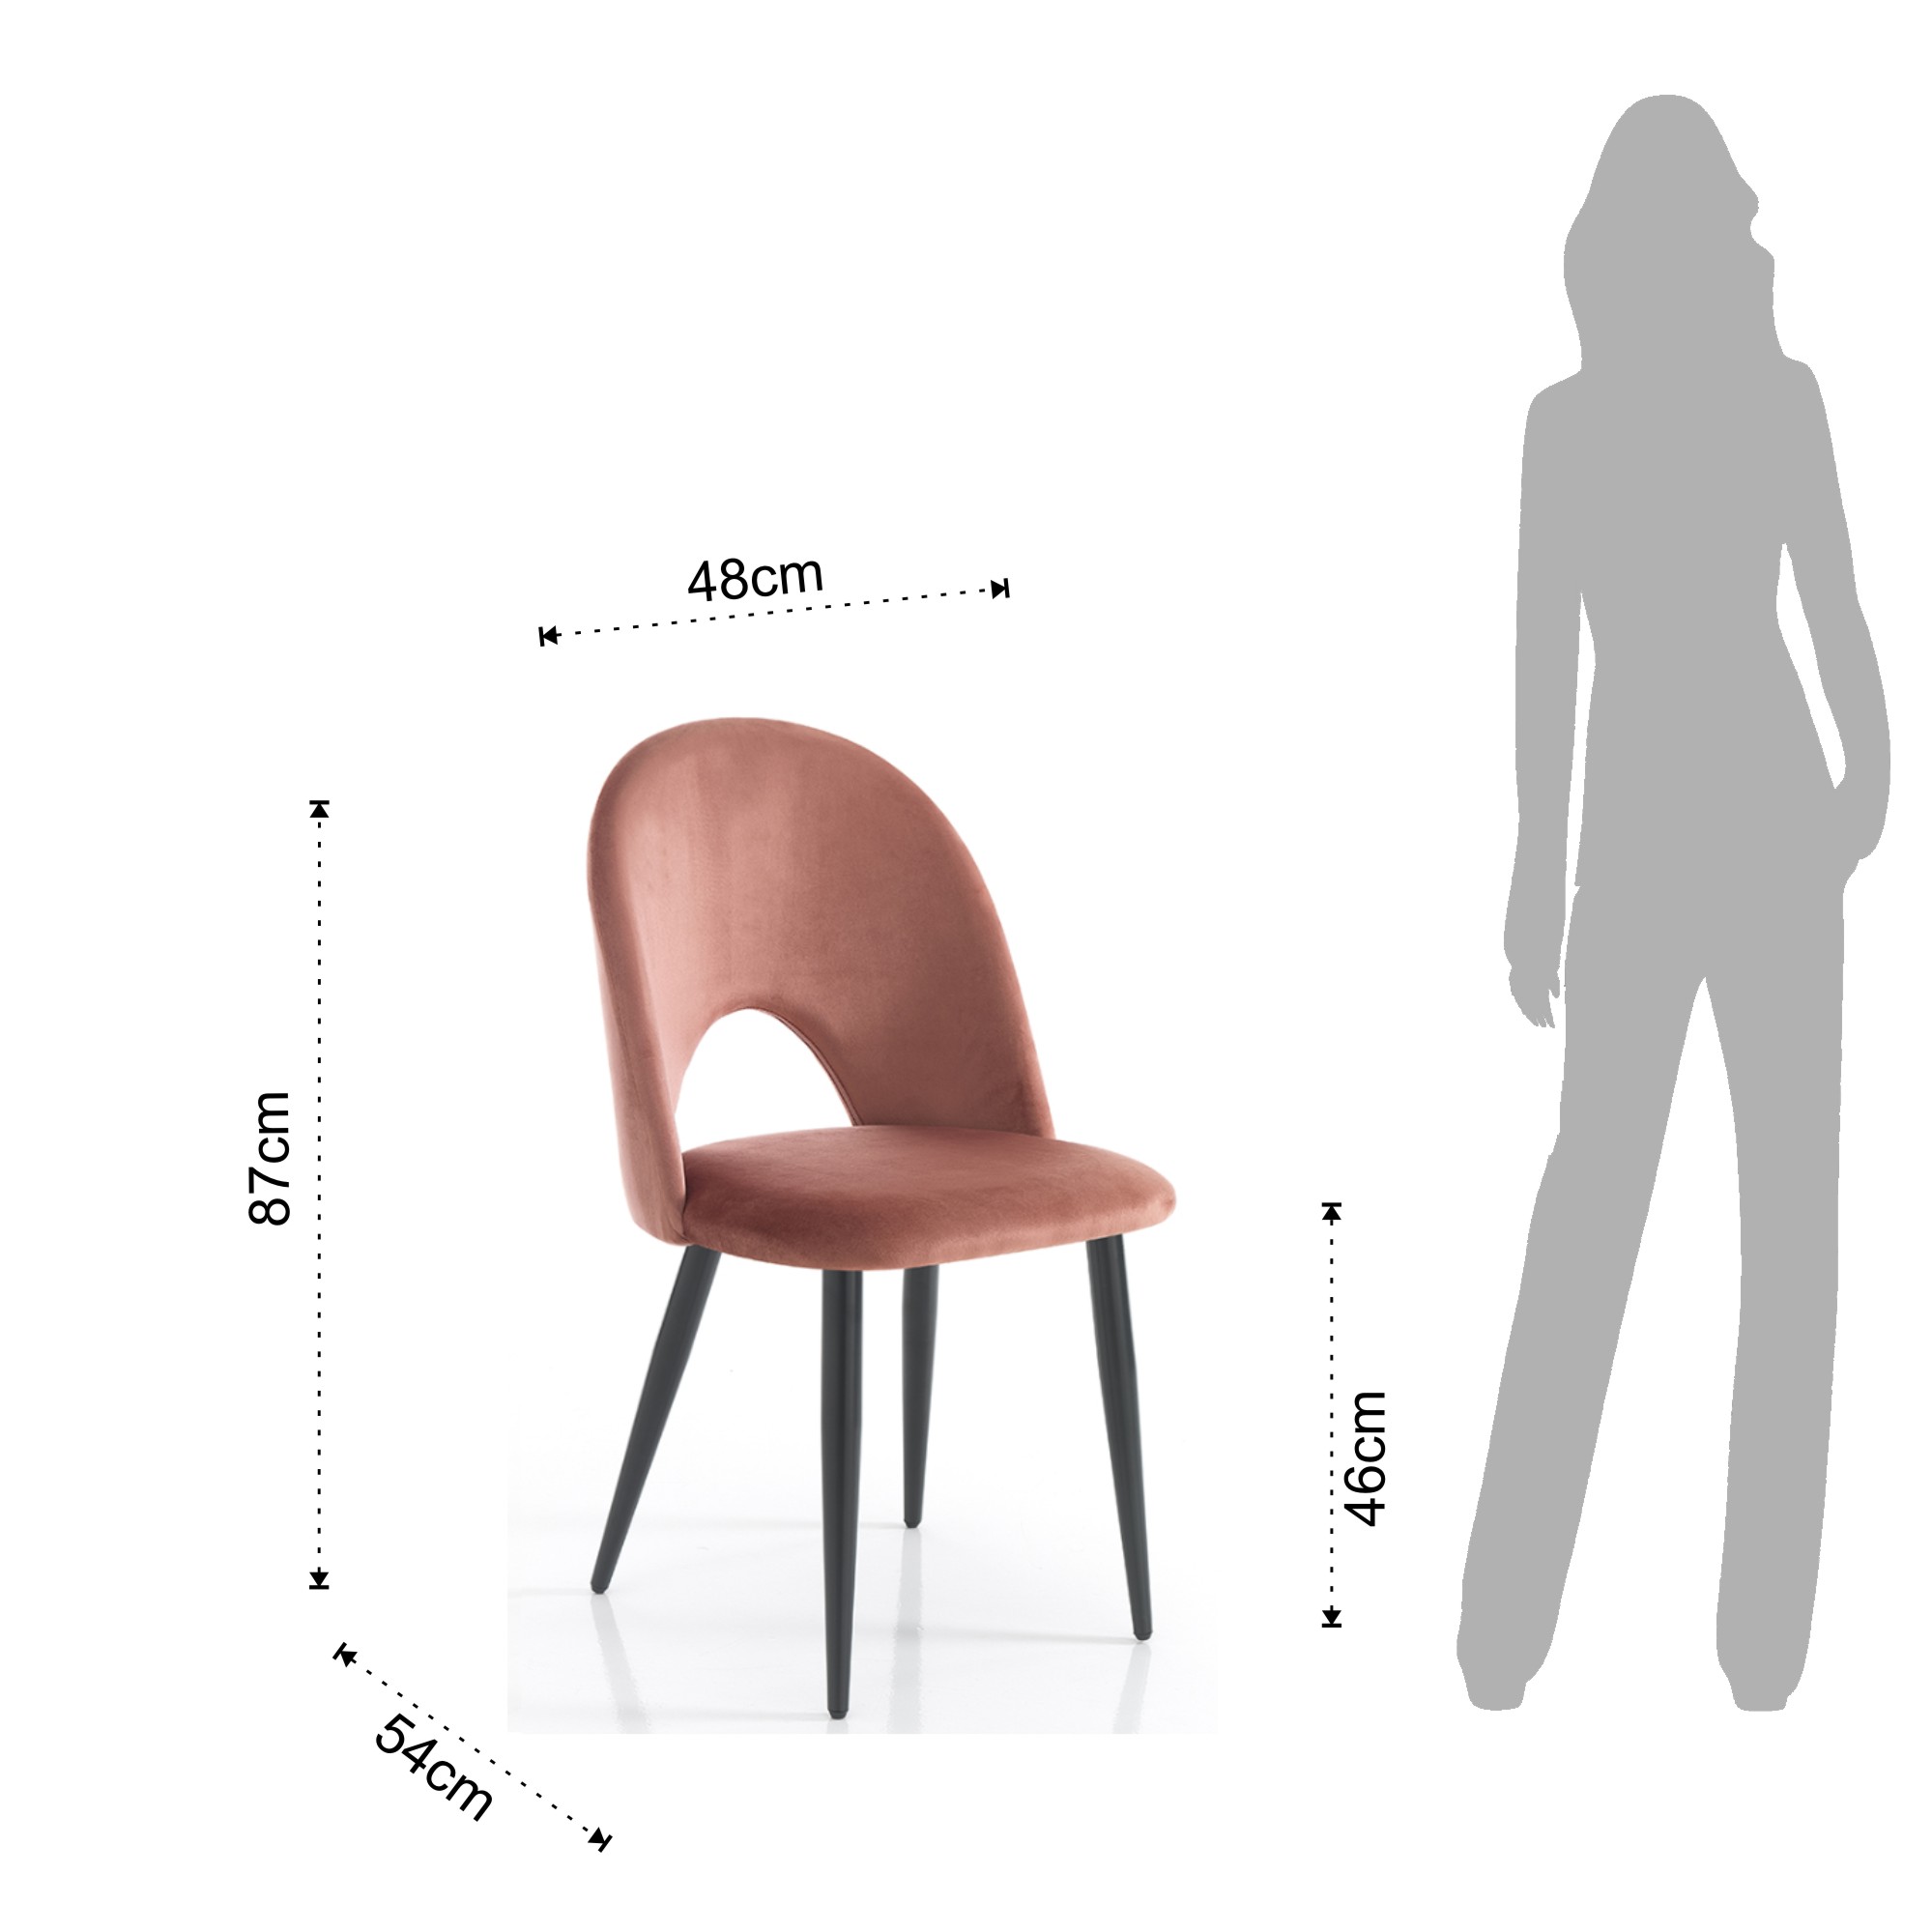 Dimensions of the Nail Chair by Tomasucci